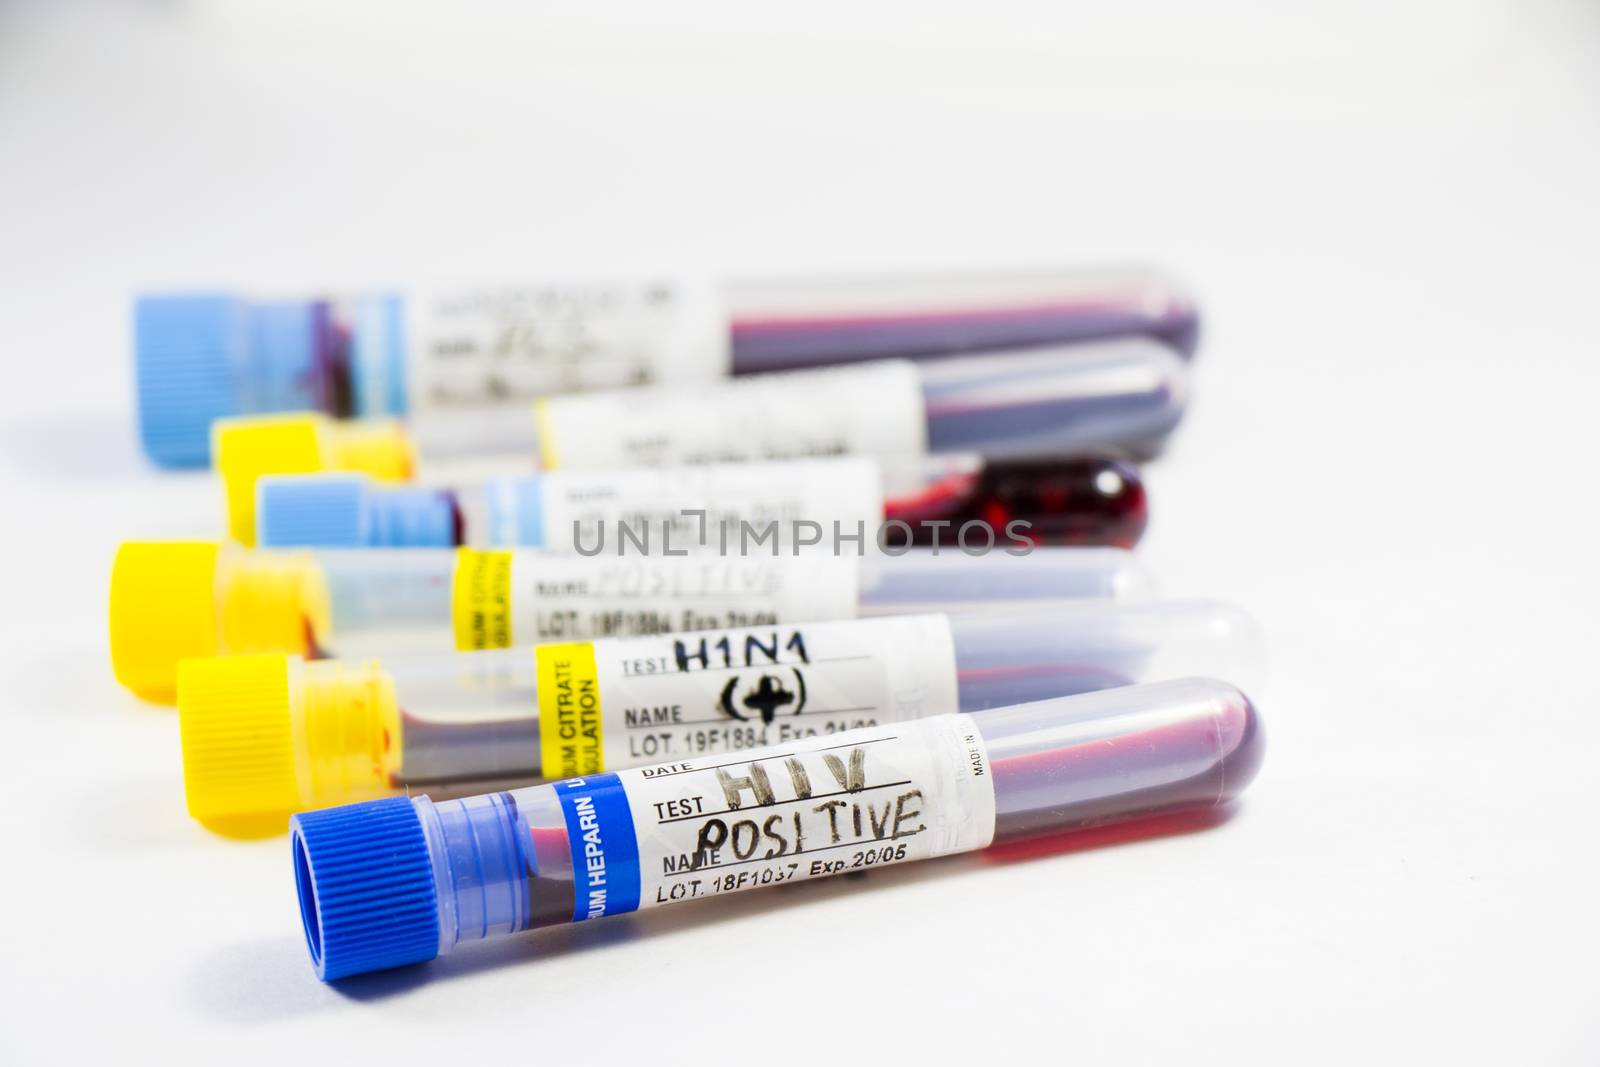 H1N1, Covid-19, Hepatitis C, Tuberculosis and Staphylococcus viruses blood tests in the tubes, laboratory diagnostics, texts and letter.